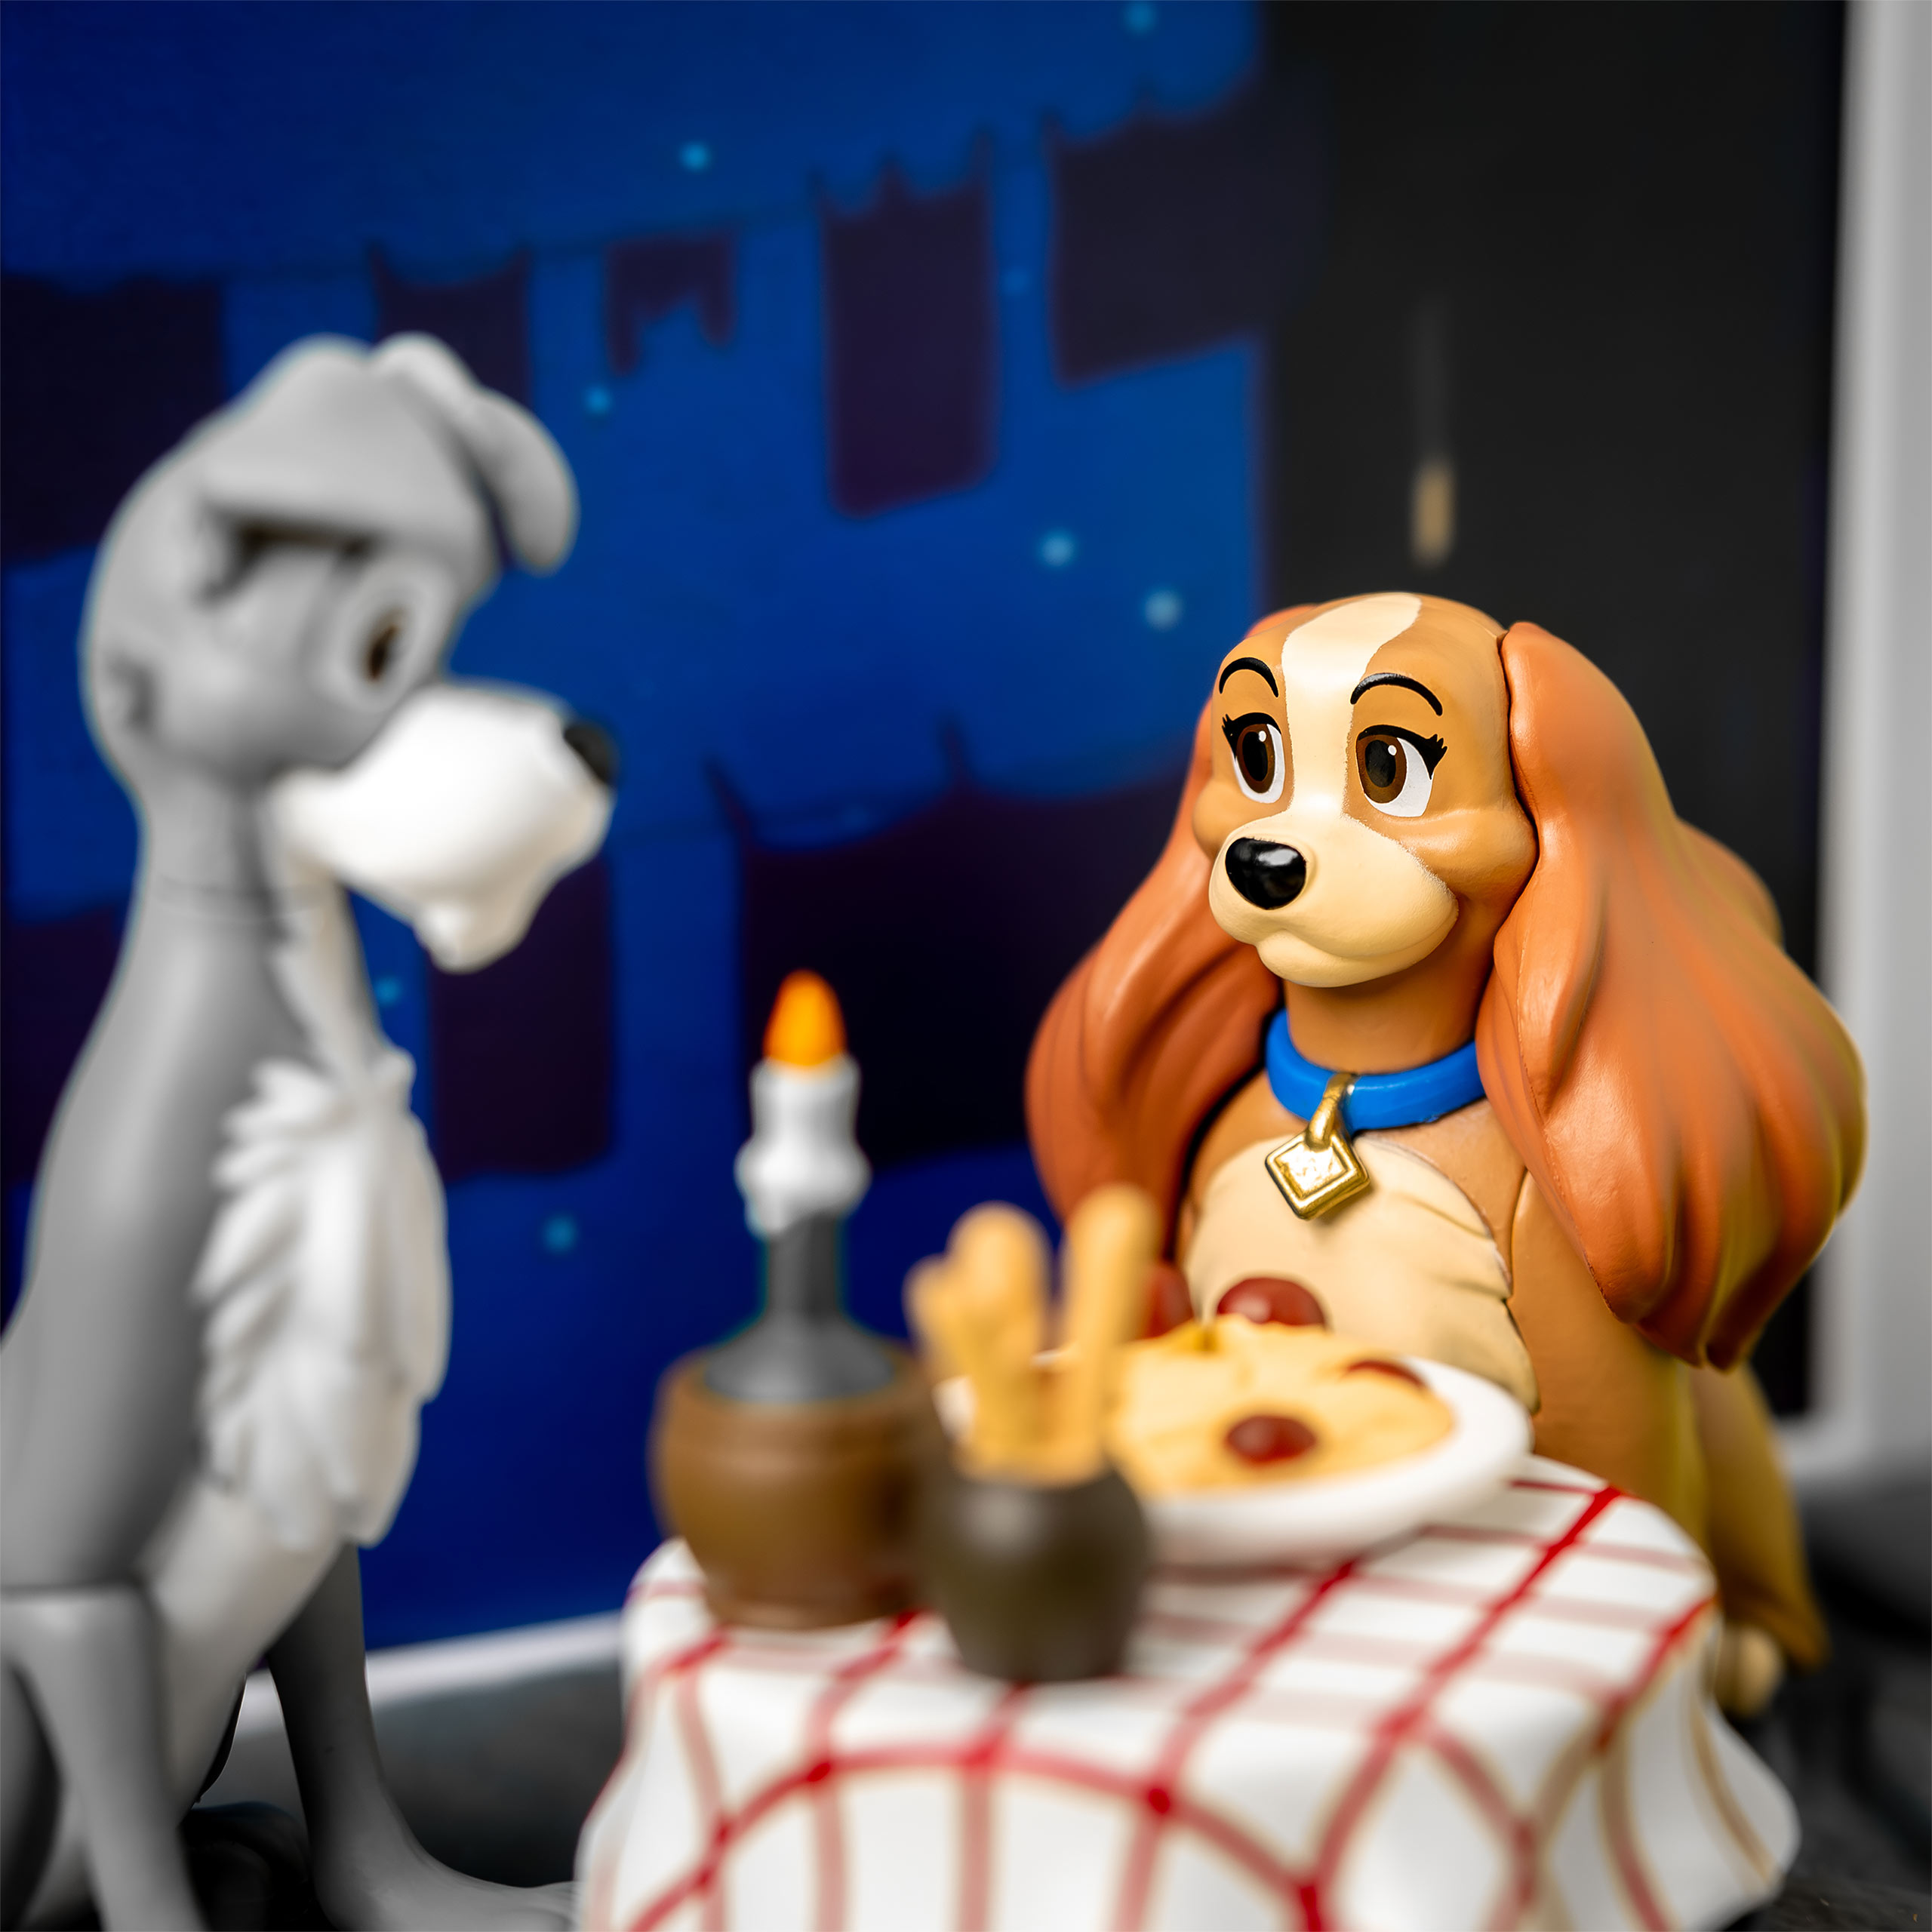 Lady and the Tramp D-Stage Diorama Figure